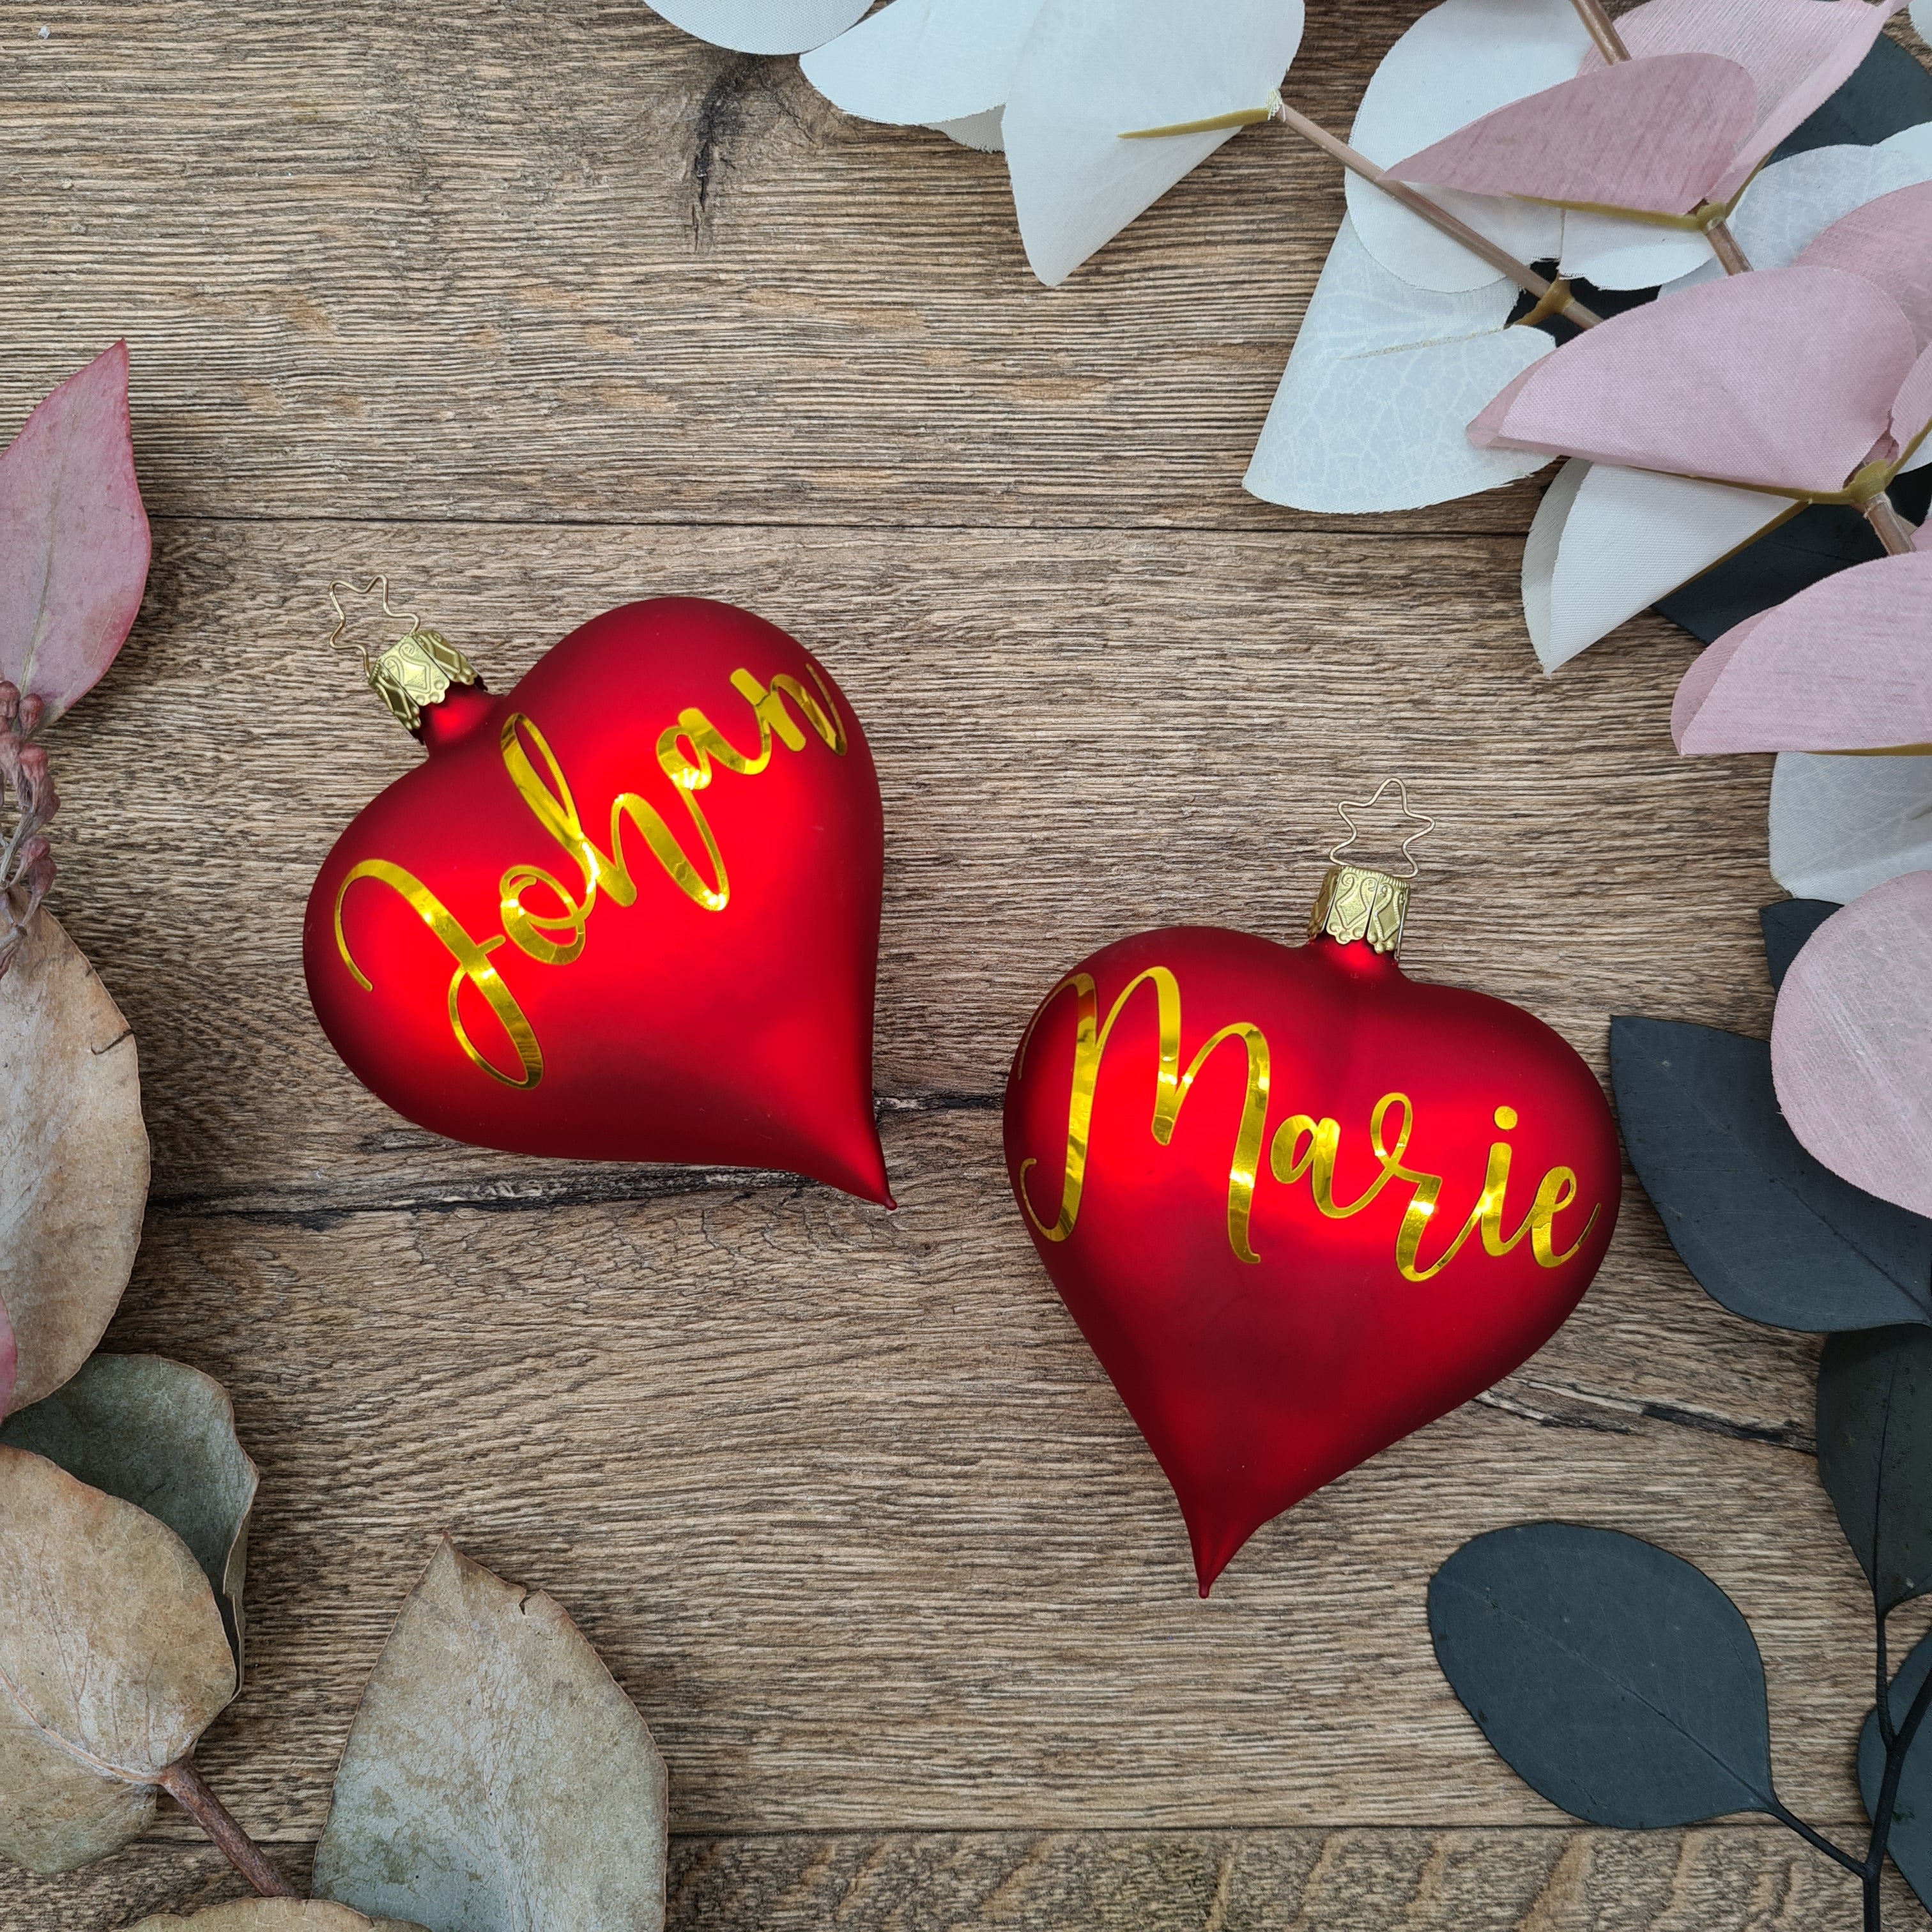 Red heart-shaped glass Christmas bauble with white text